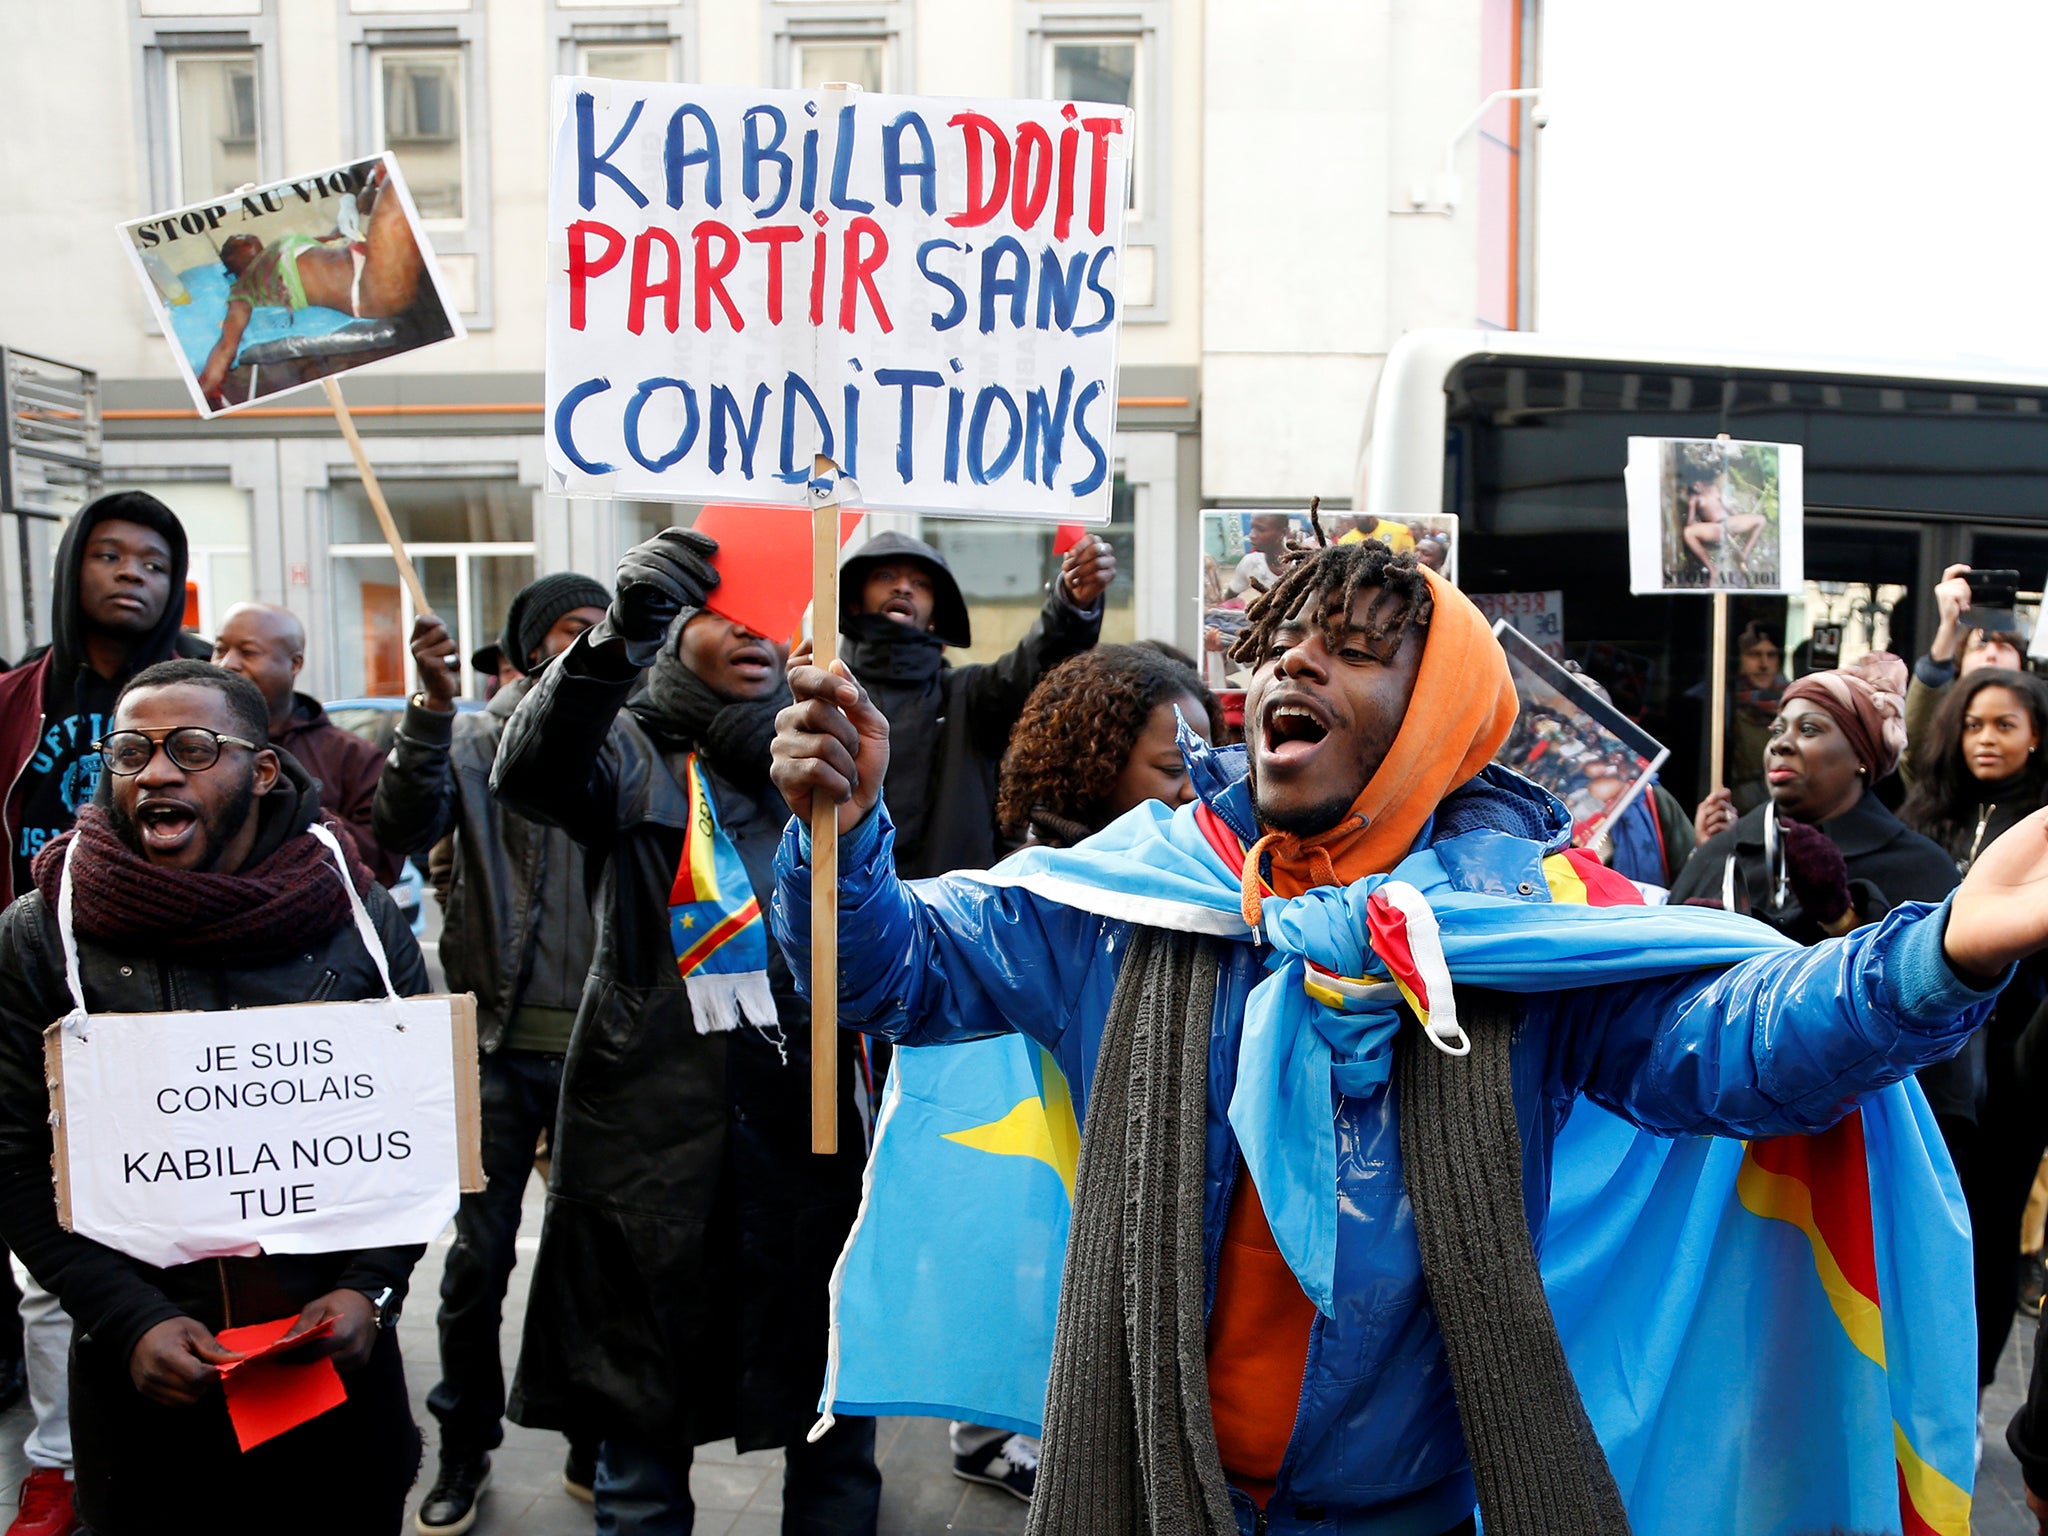 A demonstrator holds a sign reading 'Kabila must leave without any conditions' during a protest against plans of Democratic Republic of Congo's President Joseph Kabila to stay in office past the end of his term